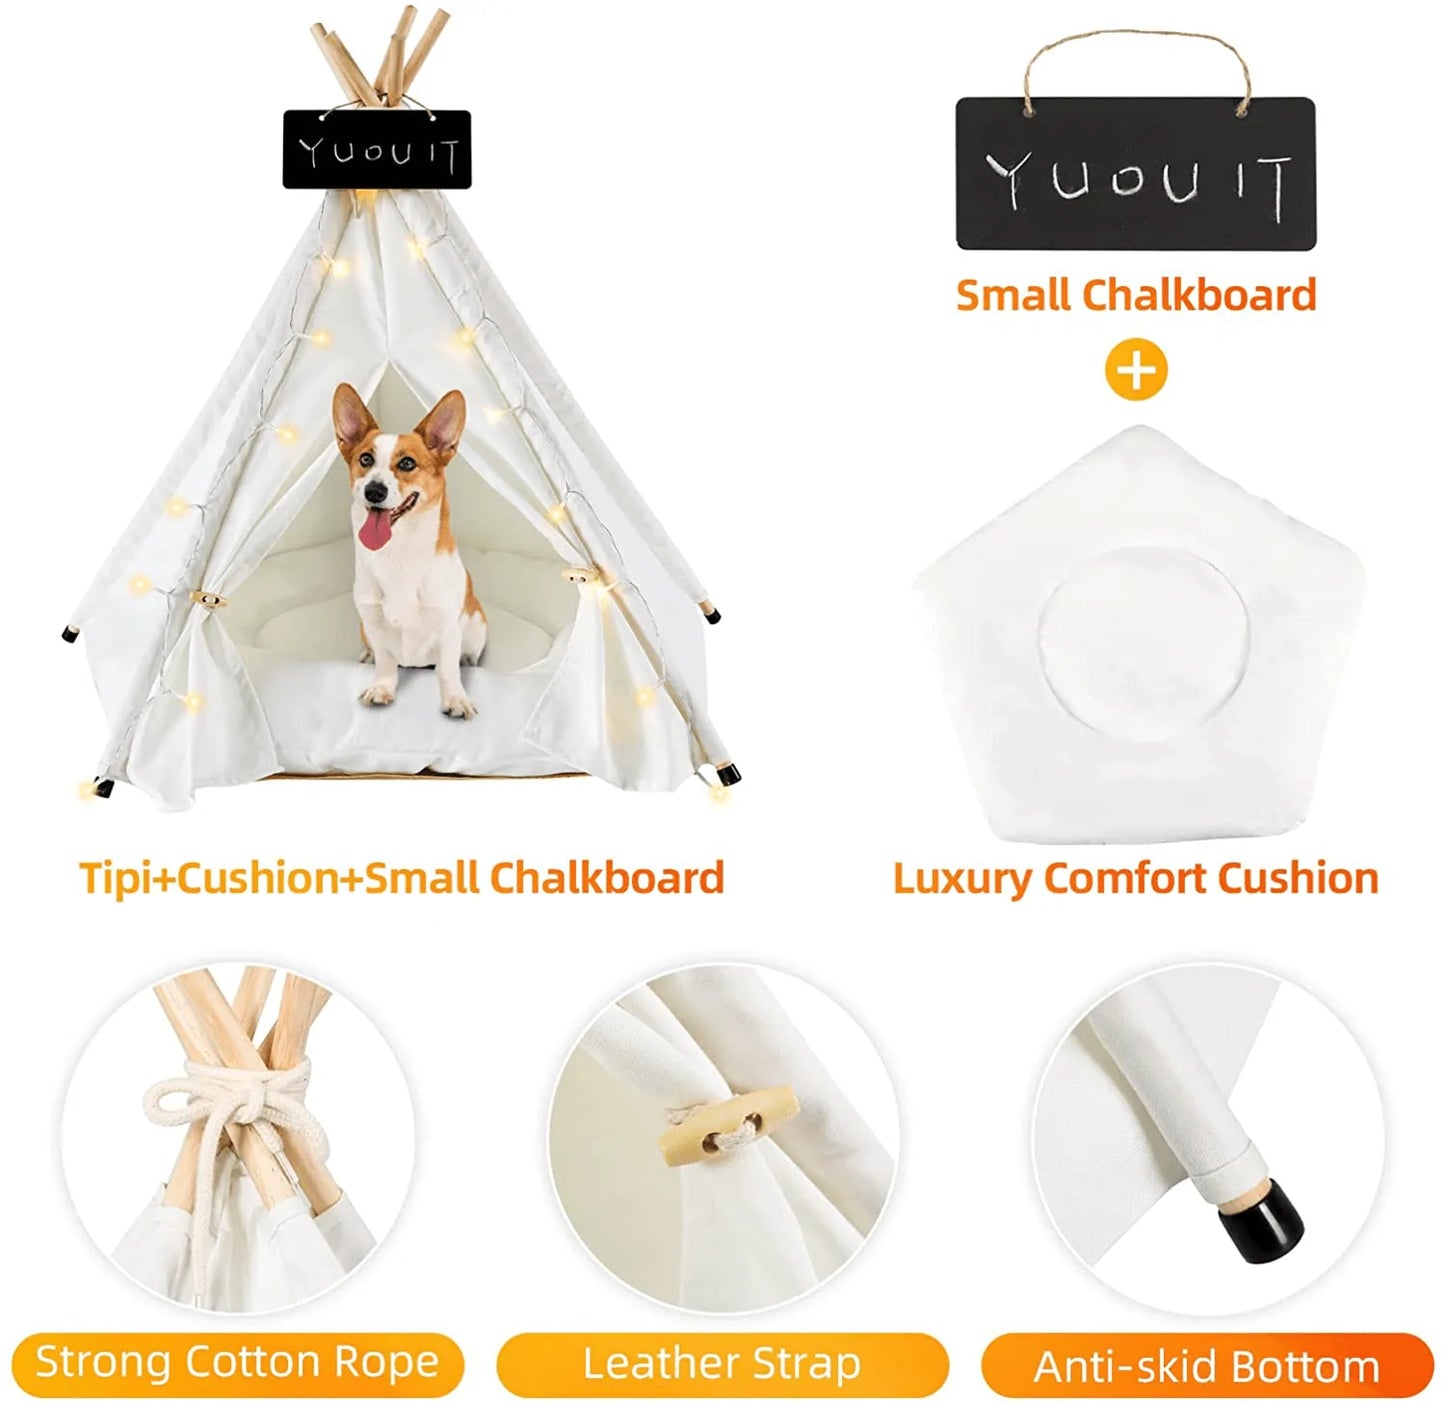 YUOUIT Pet Teepee Pet Tent with LED Light String Portable Puppy Bed for Small Dogs and Cats Folding Dogs House with Cushion for Indoor and Outdoor,Christmas,24Inches.¡­ Animals & Pet Supplies > Pet Supplies > Dog Supplies > Dog Houses YUOUIT   